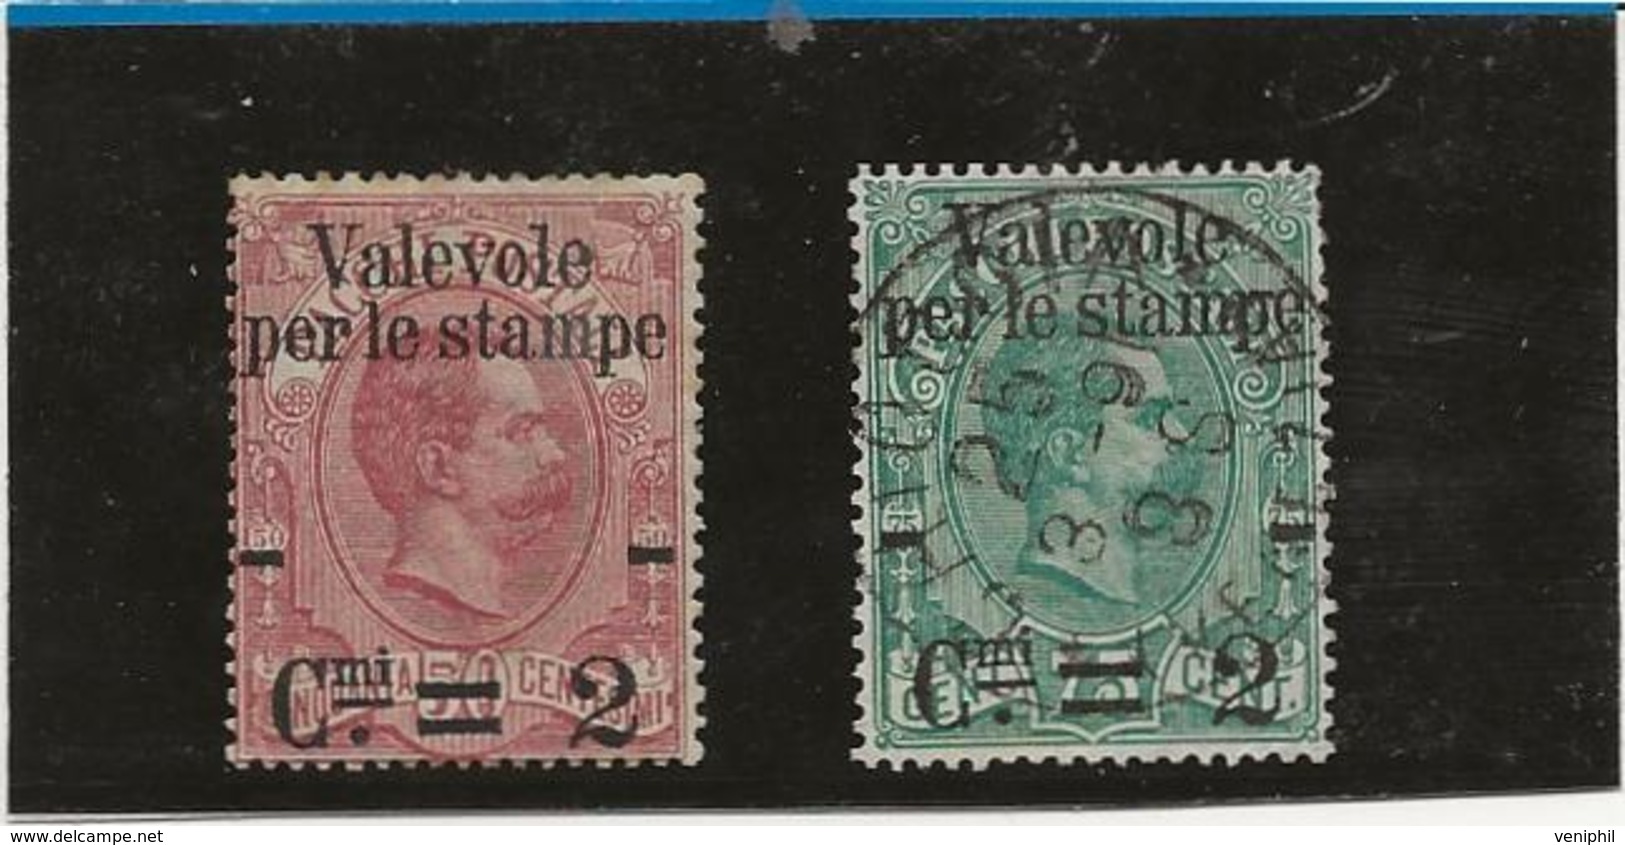 TIMBRES N° 48 NEUF S GOMME + N° 49 OBLITERE - ANNEE 1890 - COTE : 40 € - Usados